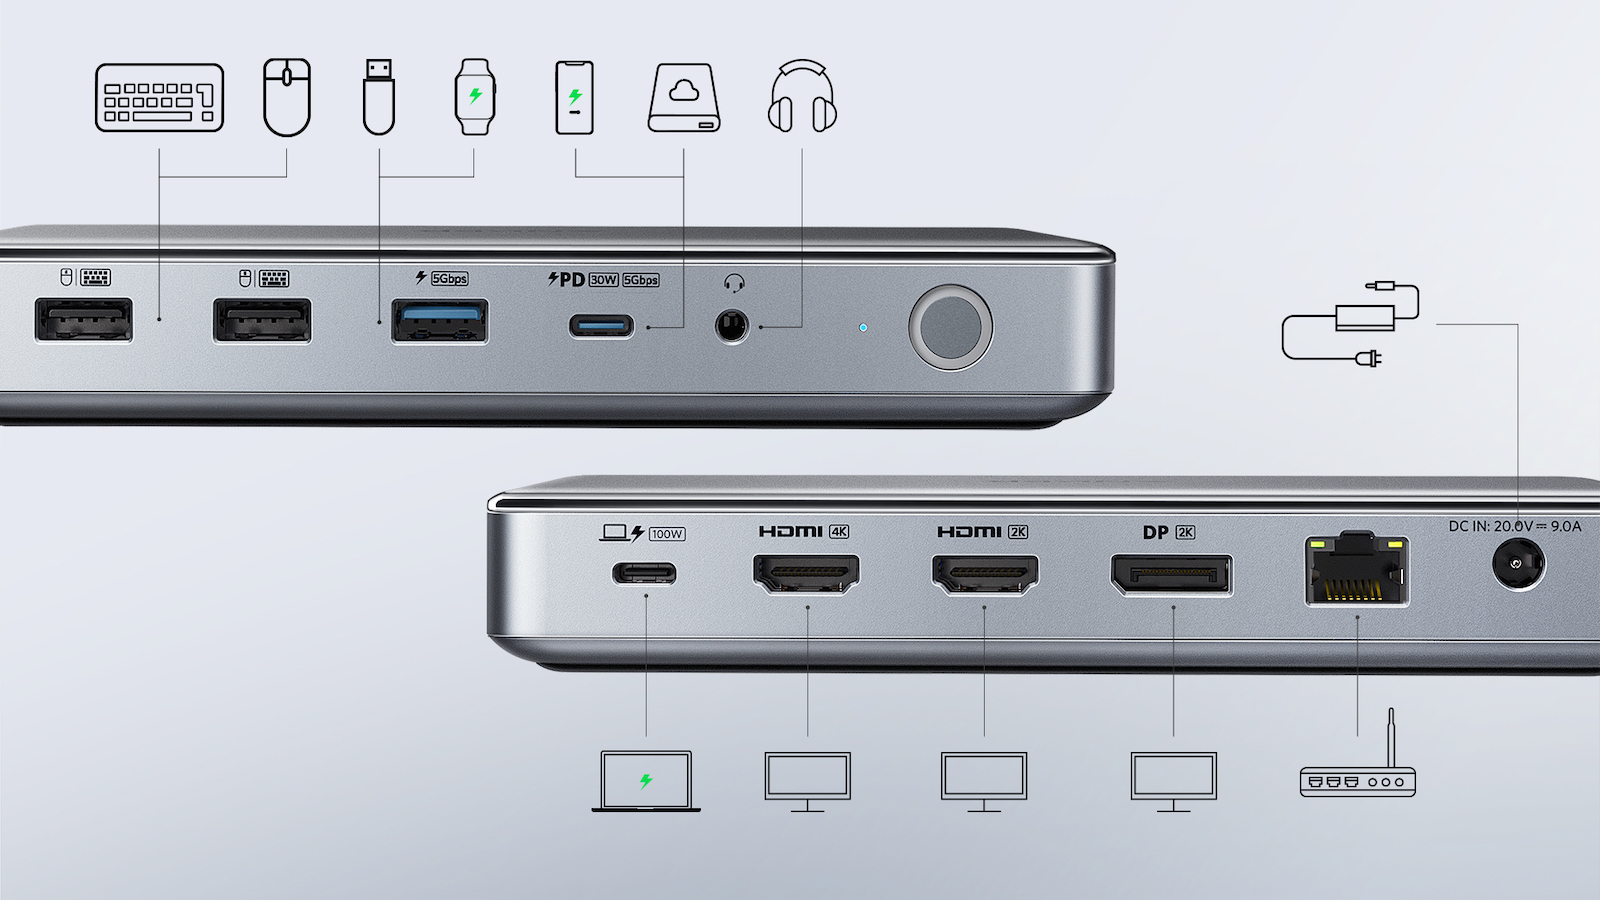 Anker’s Latest USB-C Docking Station Brings Triple-Display Support to M1 Macs